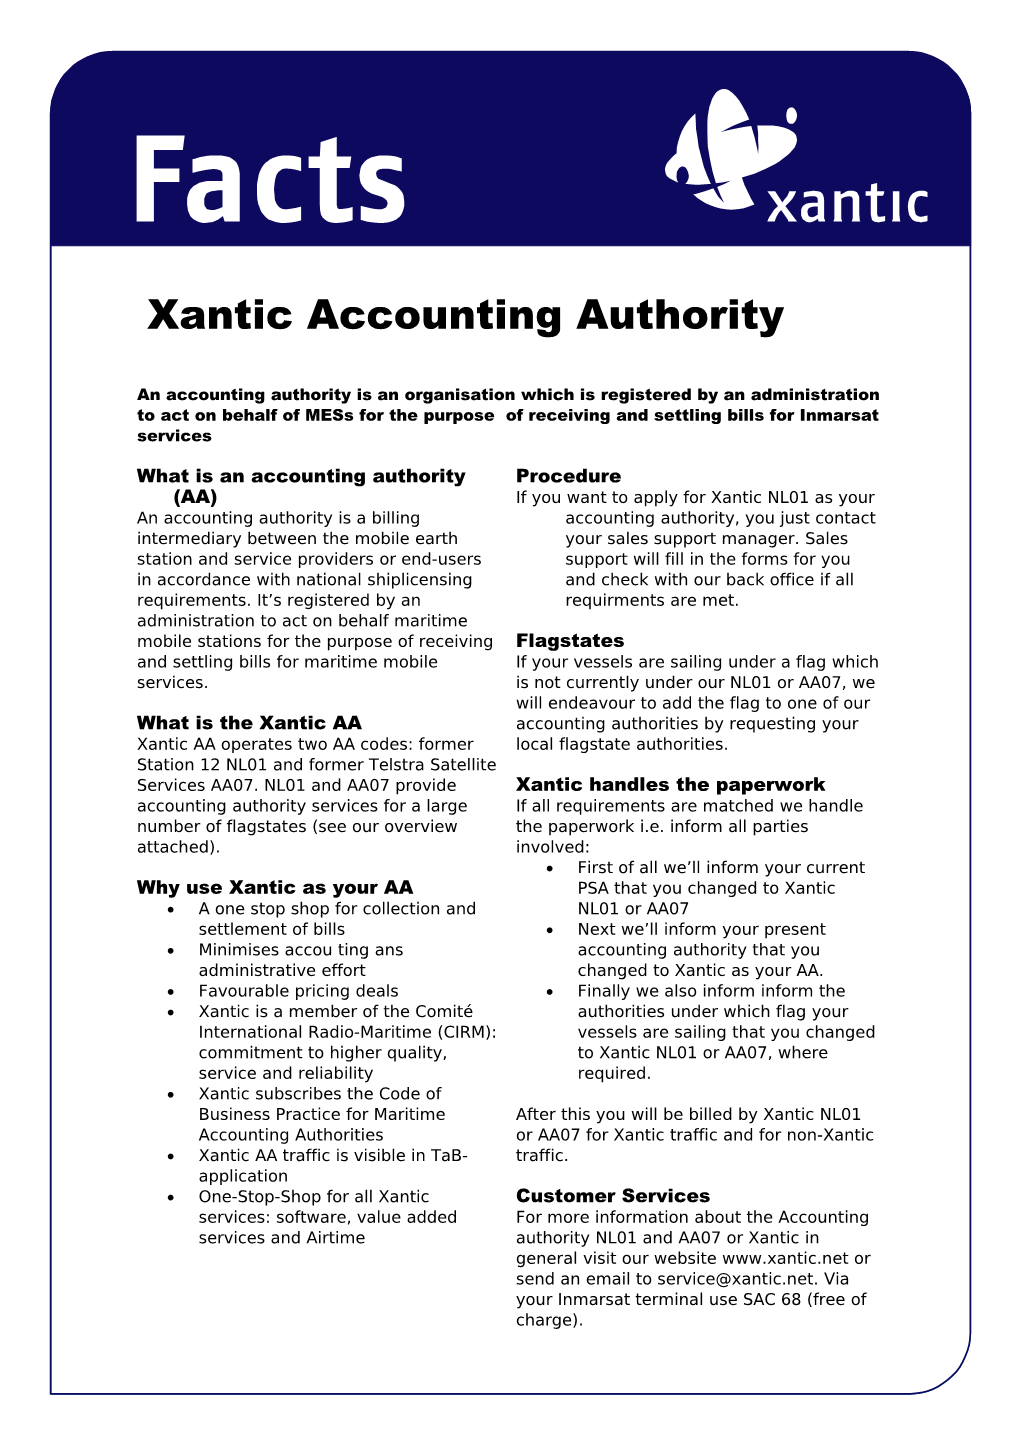 An Accounting Authority Is an Organisation Which Is Registered by an Administration To